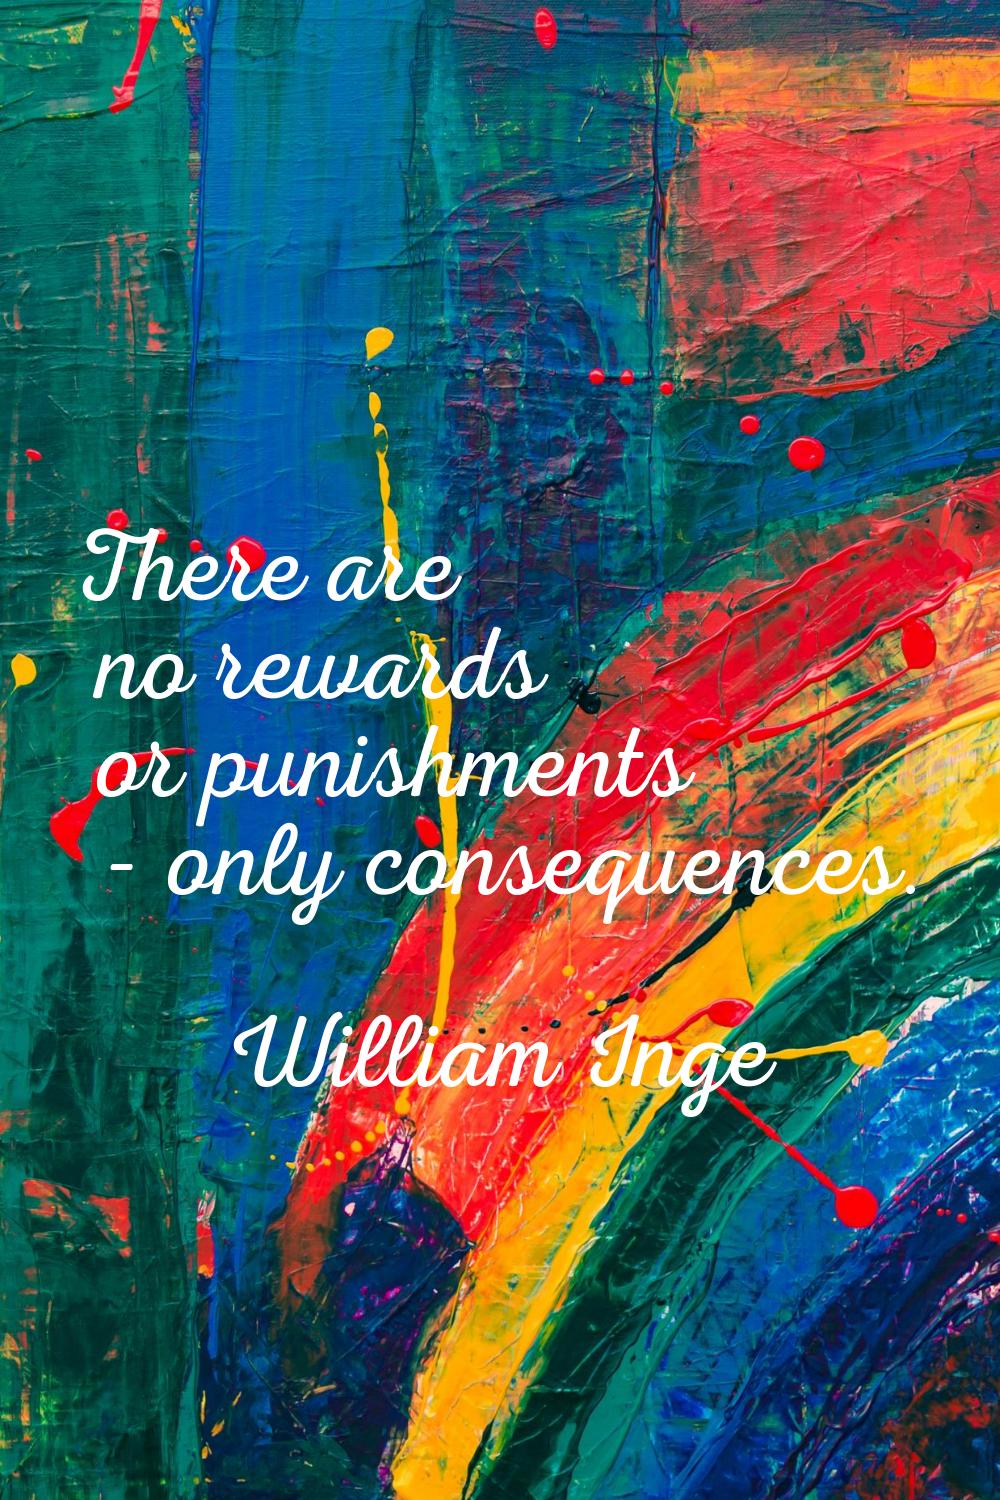 There are no rewards or punishments - only consequences.